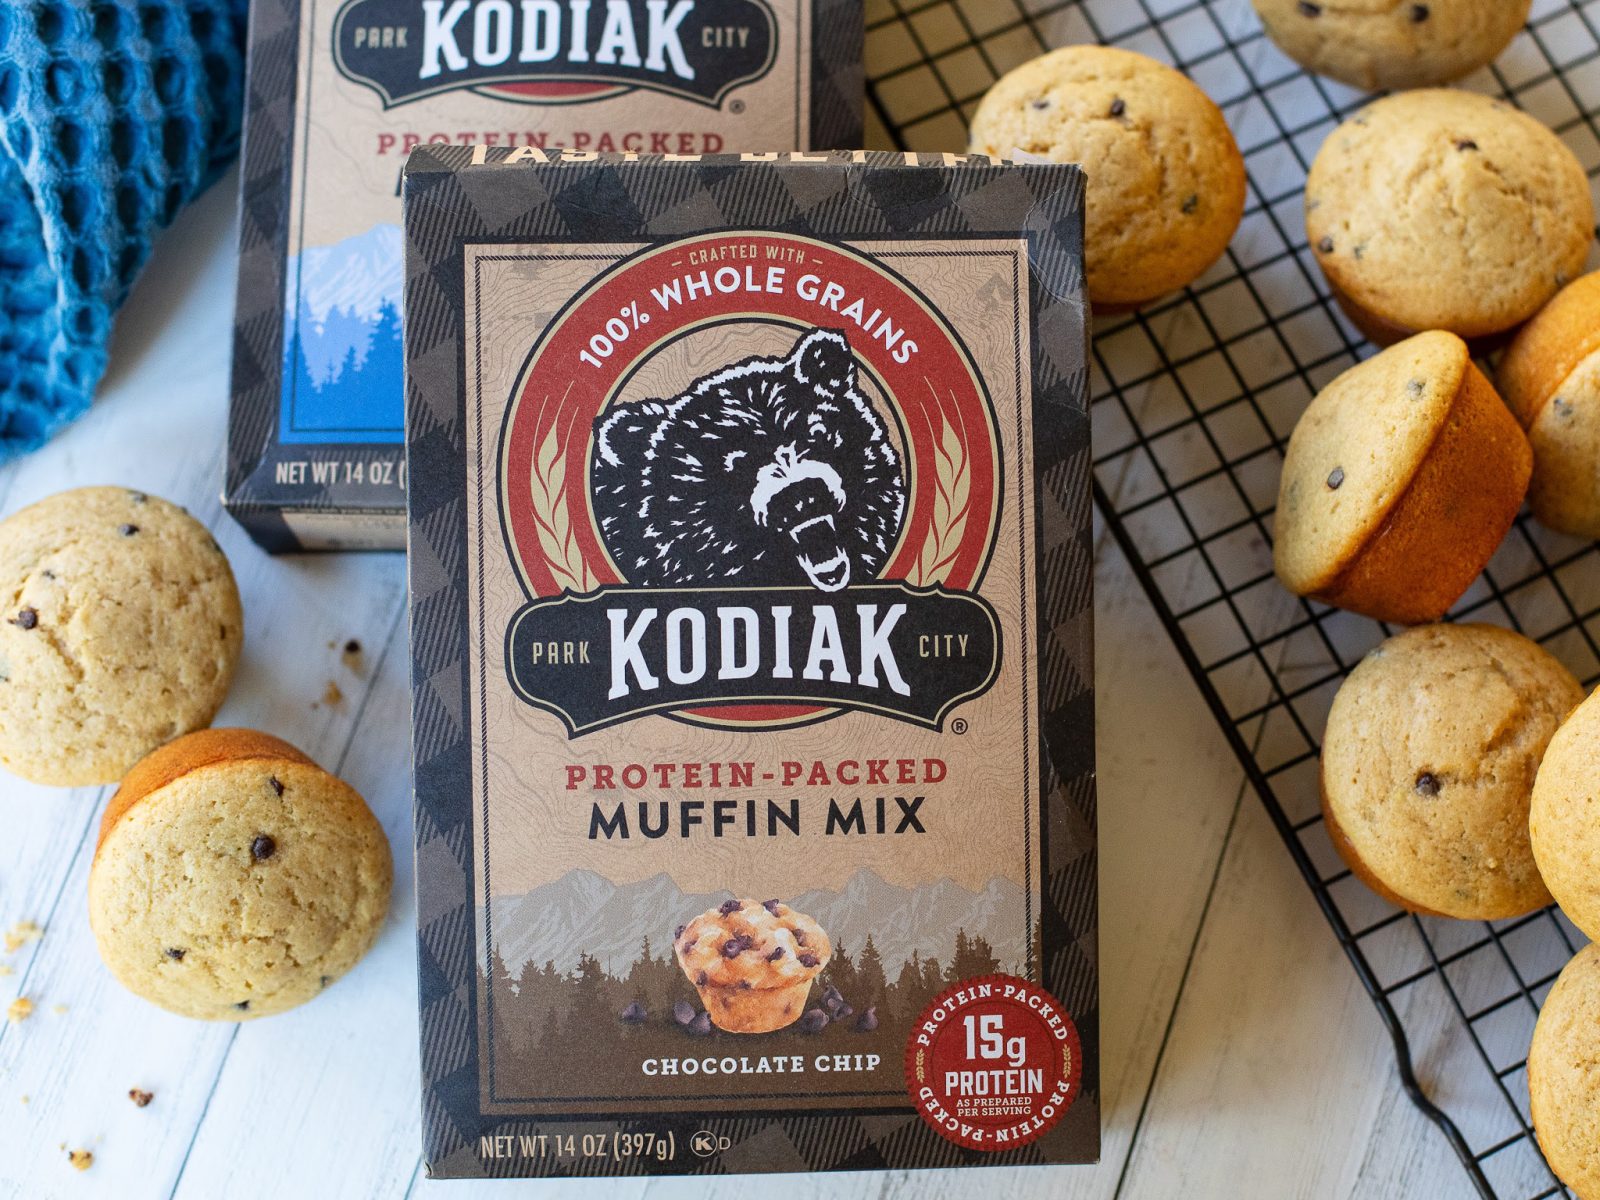 Kodiak Protein-Packed Muffin Mix As Low As $3.49 At Kroger